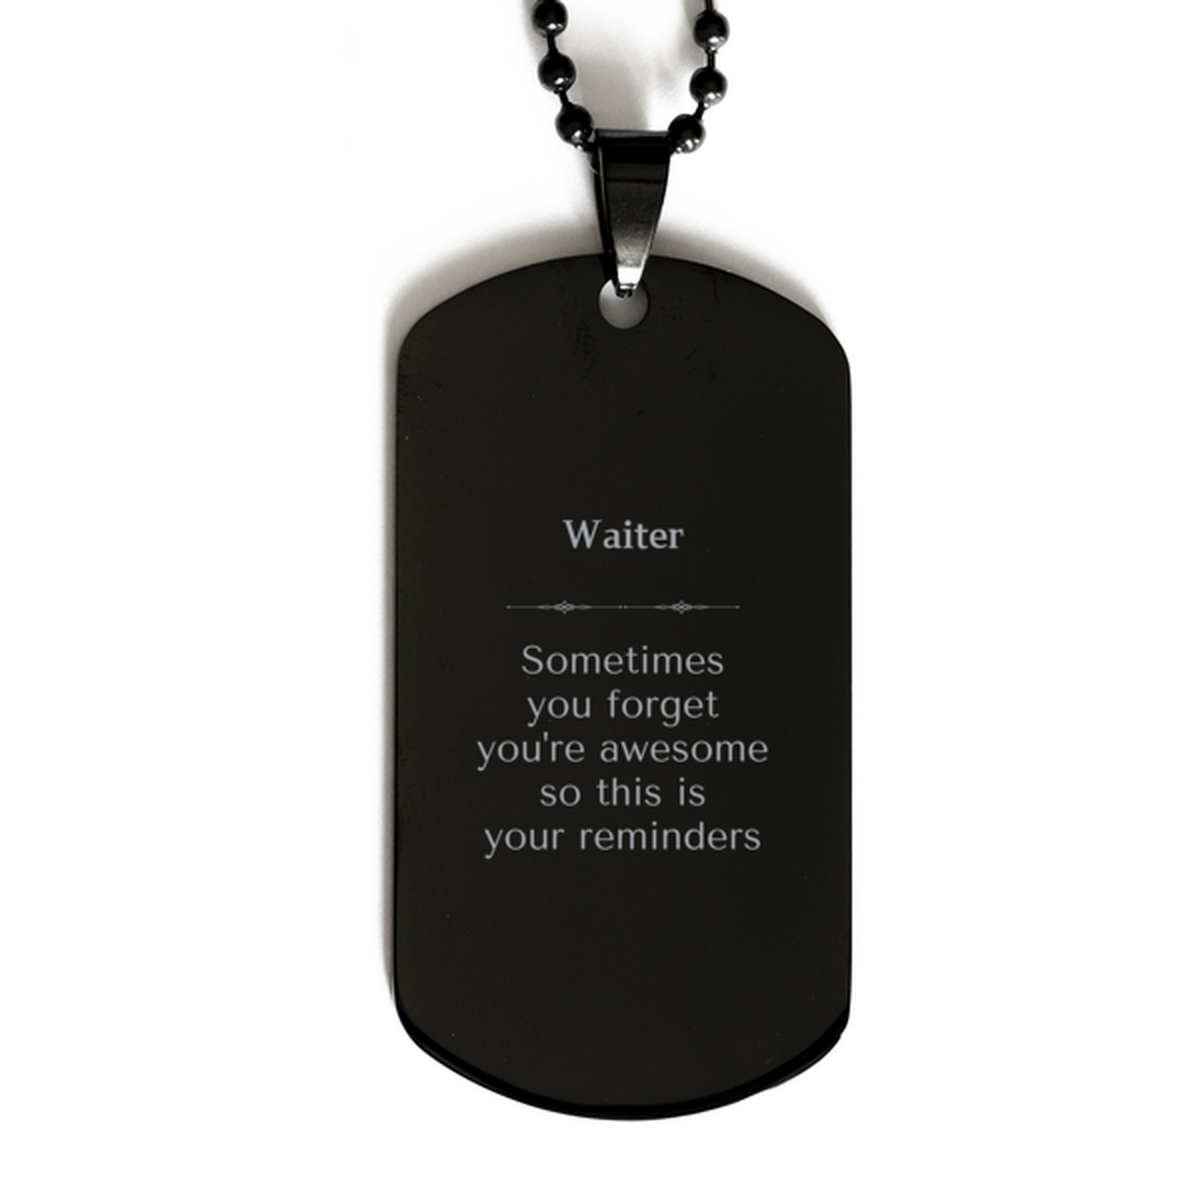 Sentimental Waiter Black Dog Tag, Waiter Sometimes you forget you're awesome so this is your reminders, Graduation Christmas Birthday Gifts for Waiter, Men, Women, Coworkers